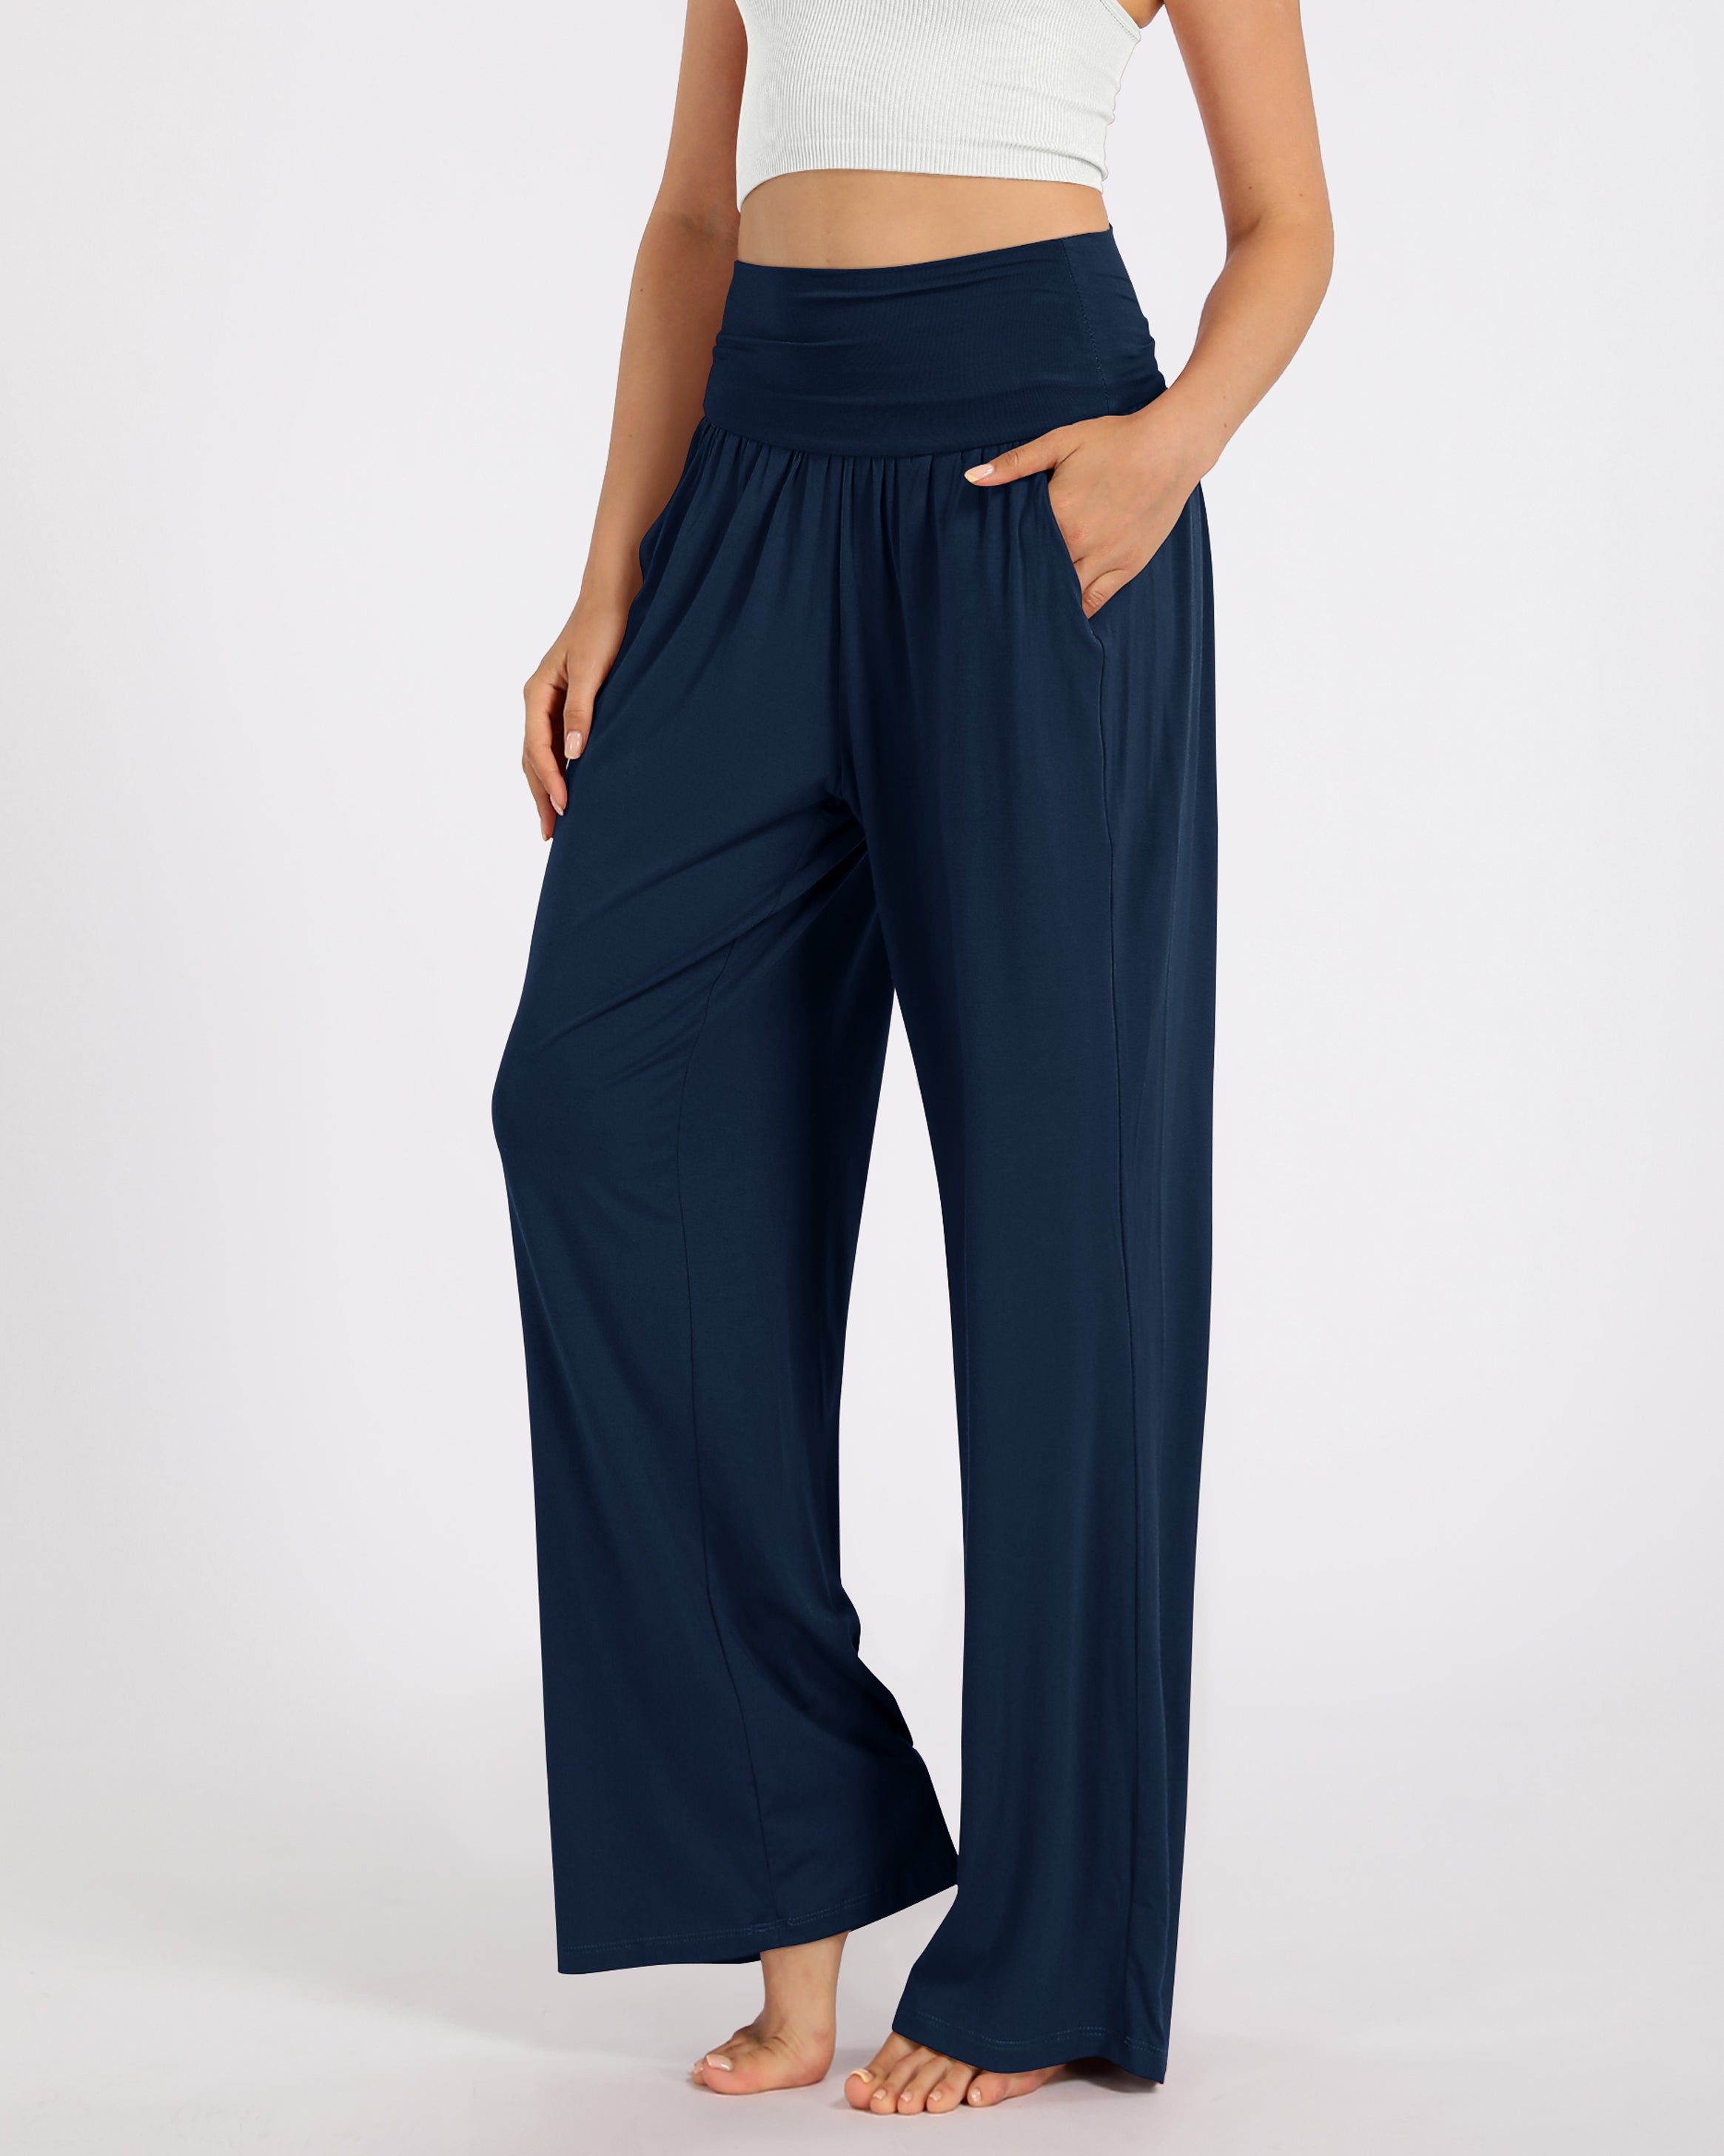 Wide Leg Lounge Pants with Pockets Navy - ododos